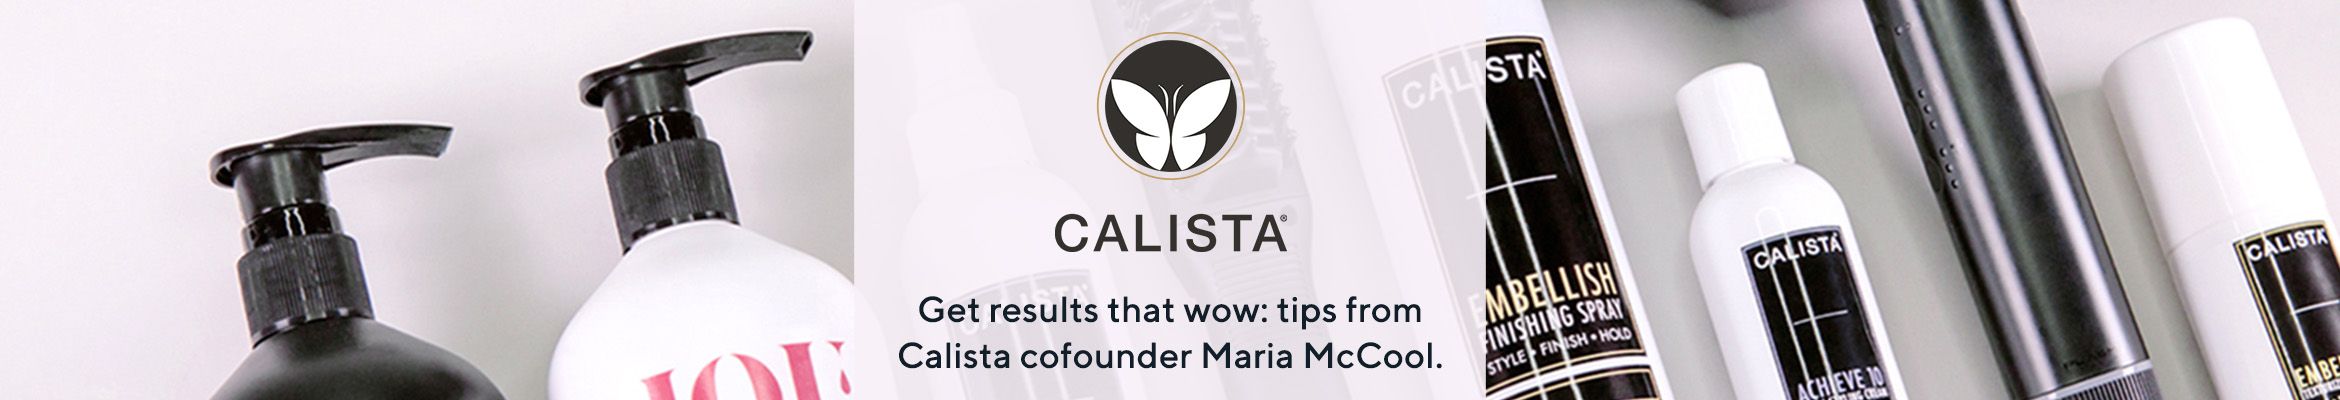 Calista™ Get results that wow: tips from Calista cofounder Maria McCool